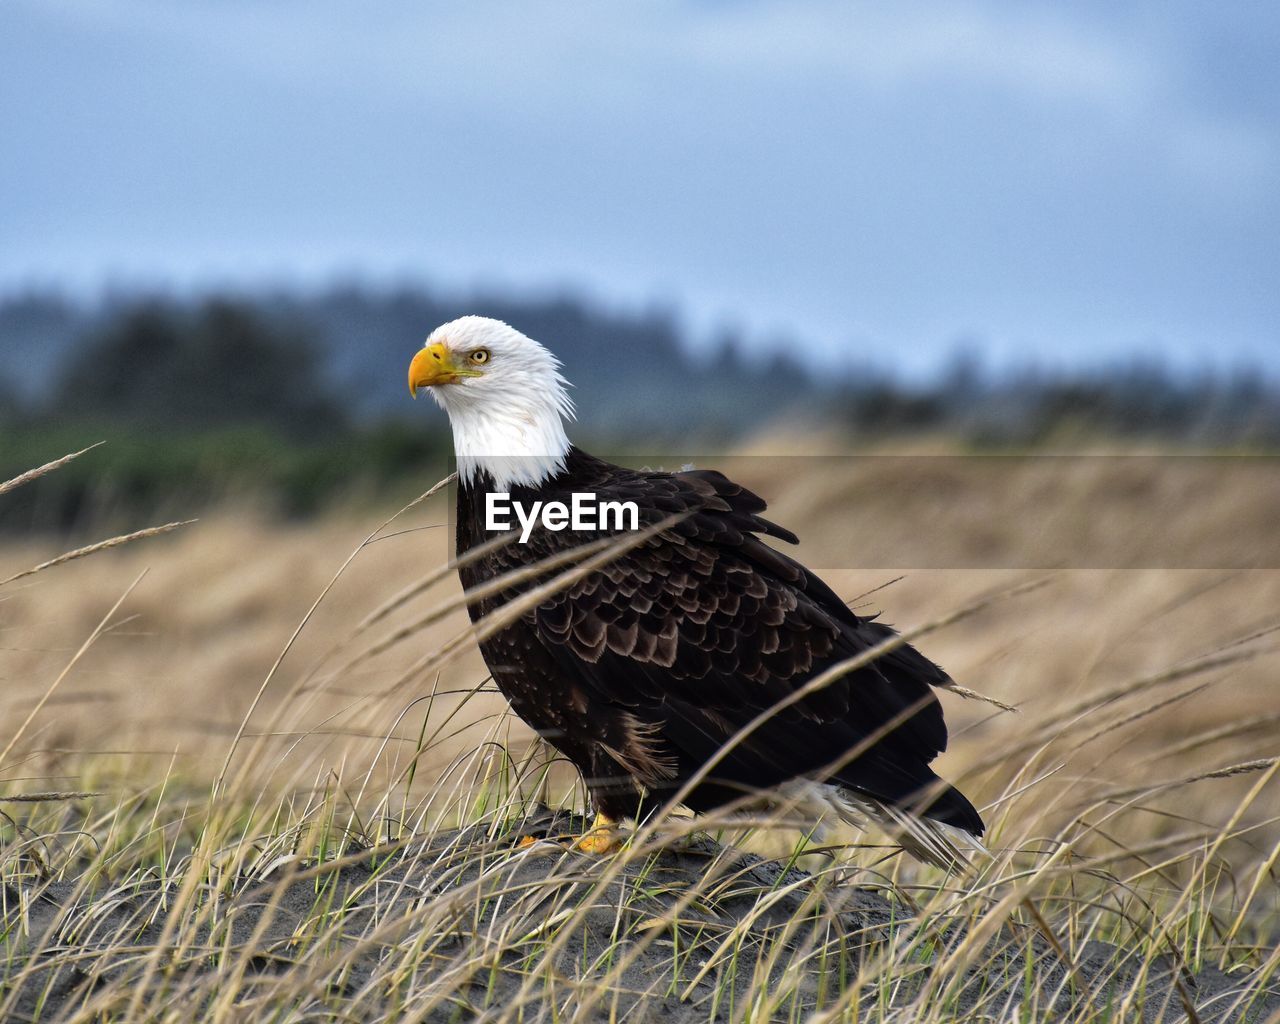 Bald eagle perching on a field